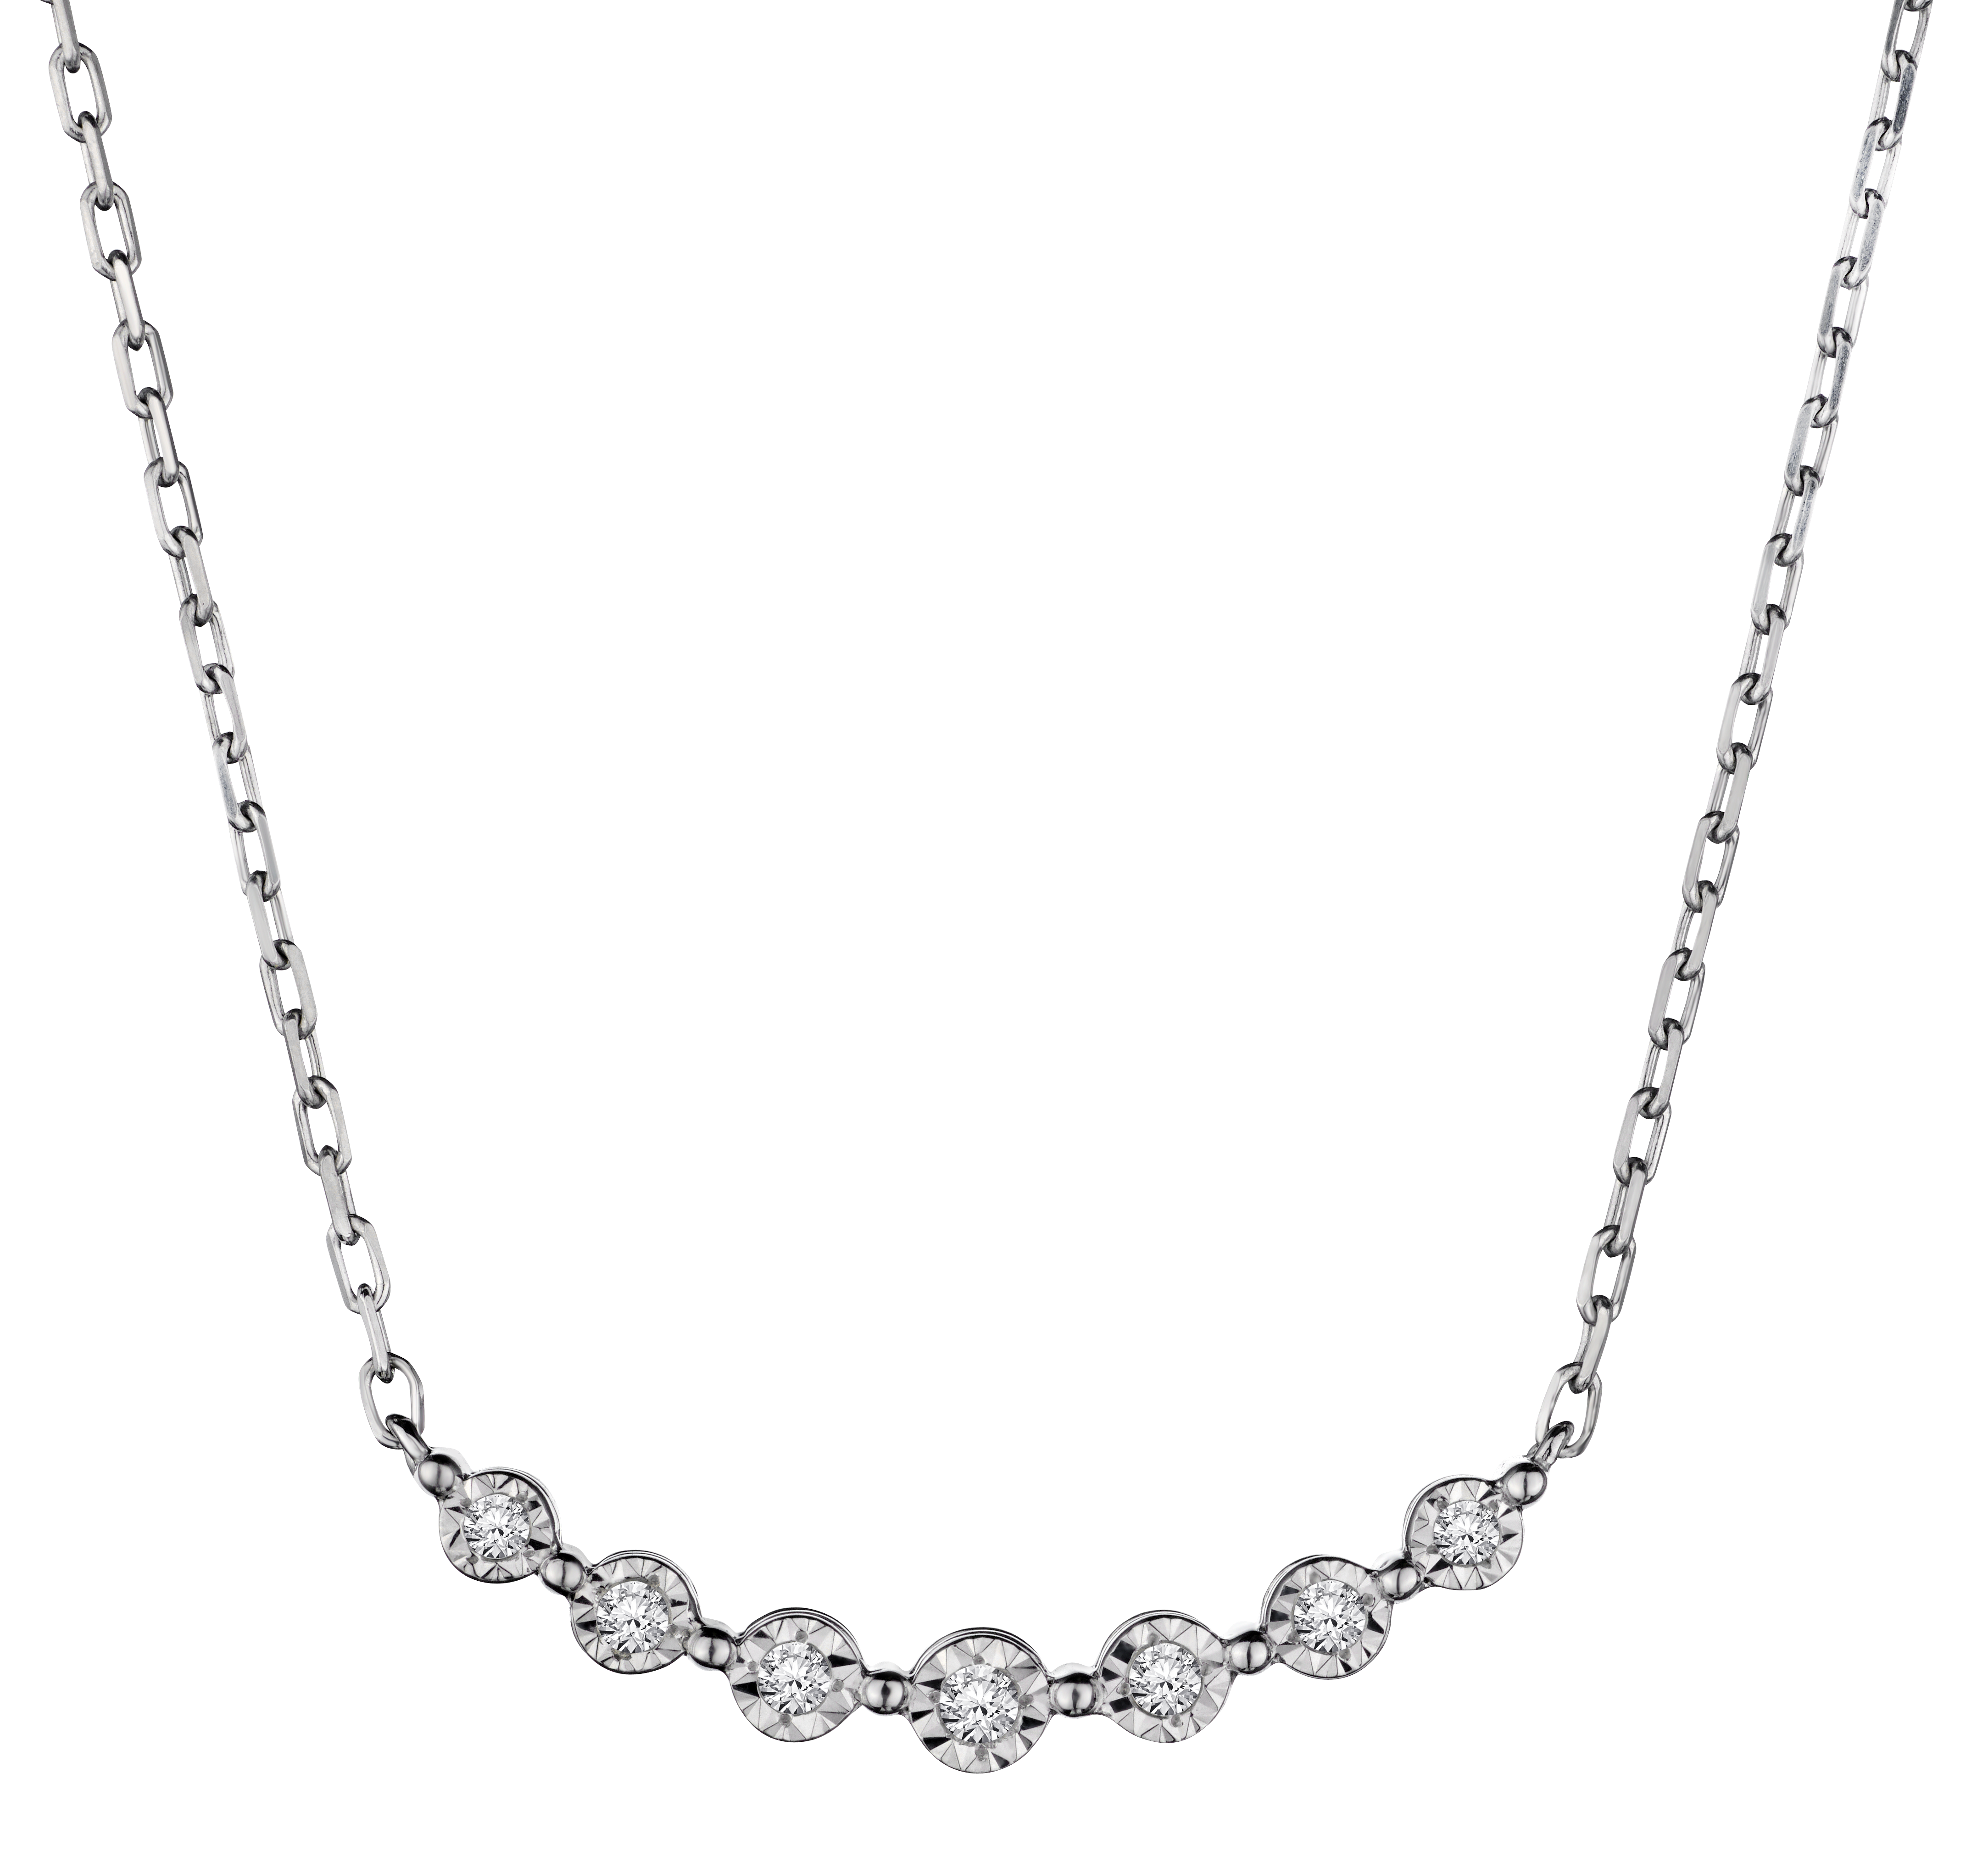 .12 Carat of Diamonds Necklace, Silver.....................NOW